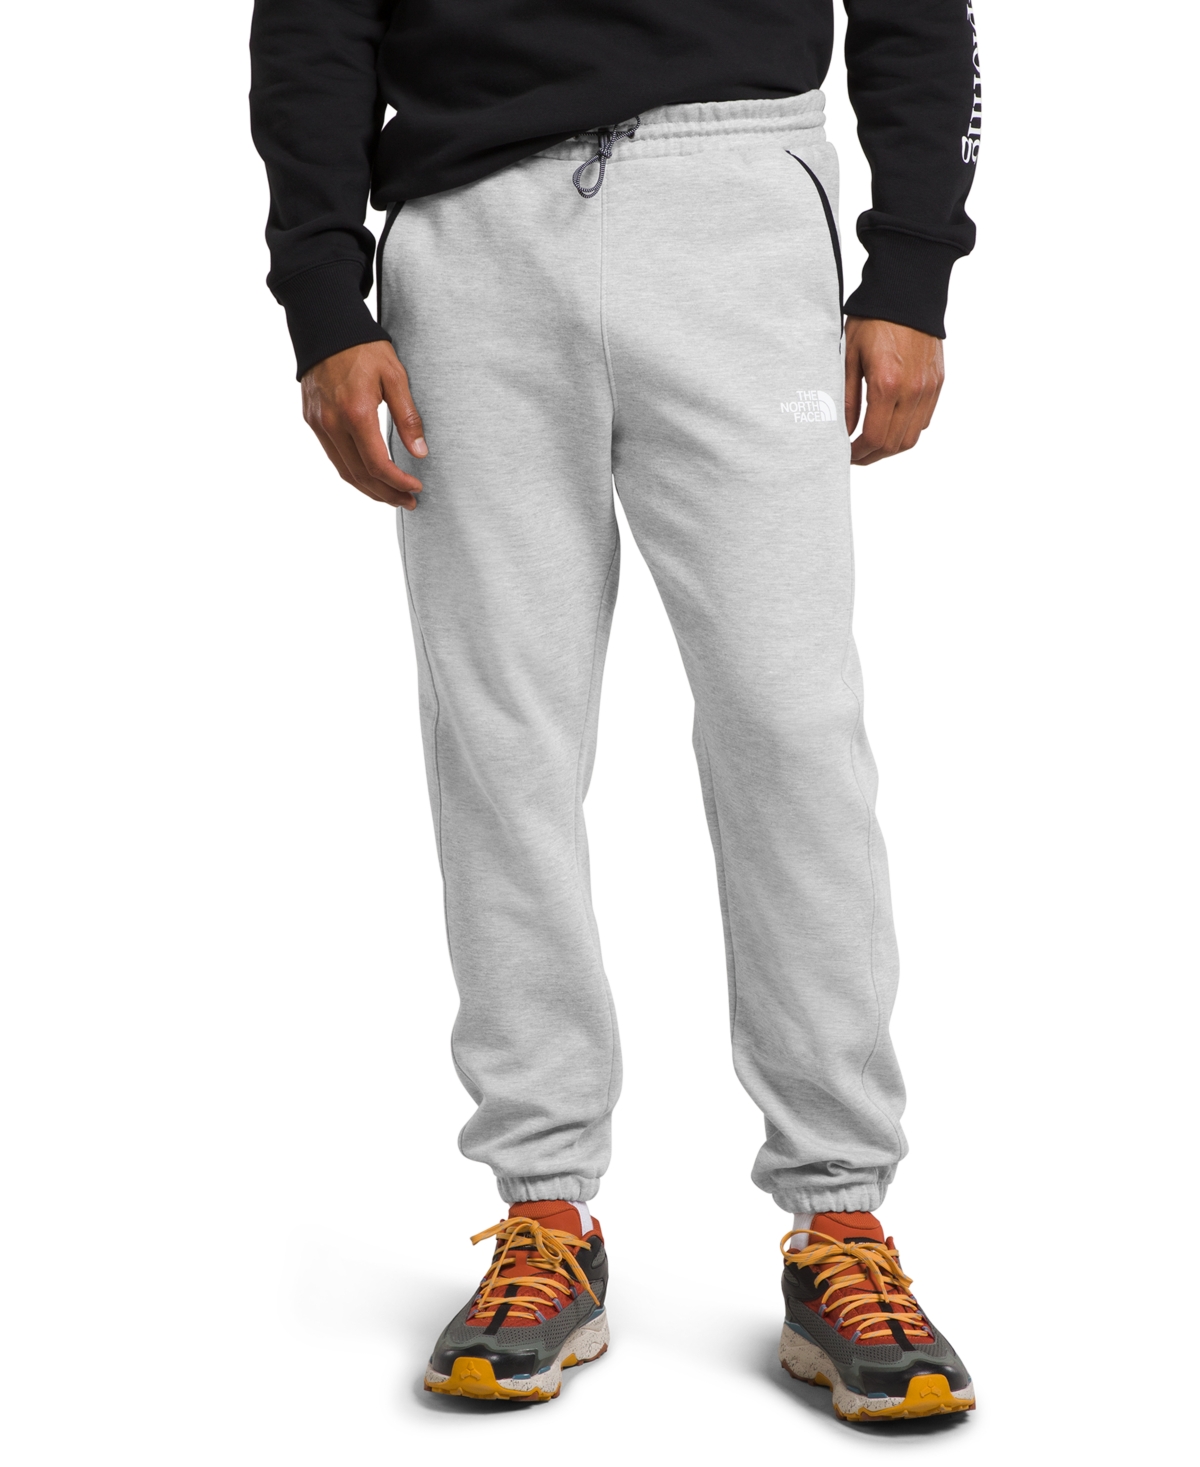 The North Face Men's Tech Pant In Tnf Light Grey Heather,tnf Light Grey He